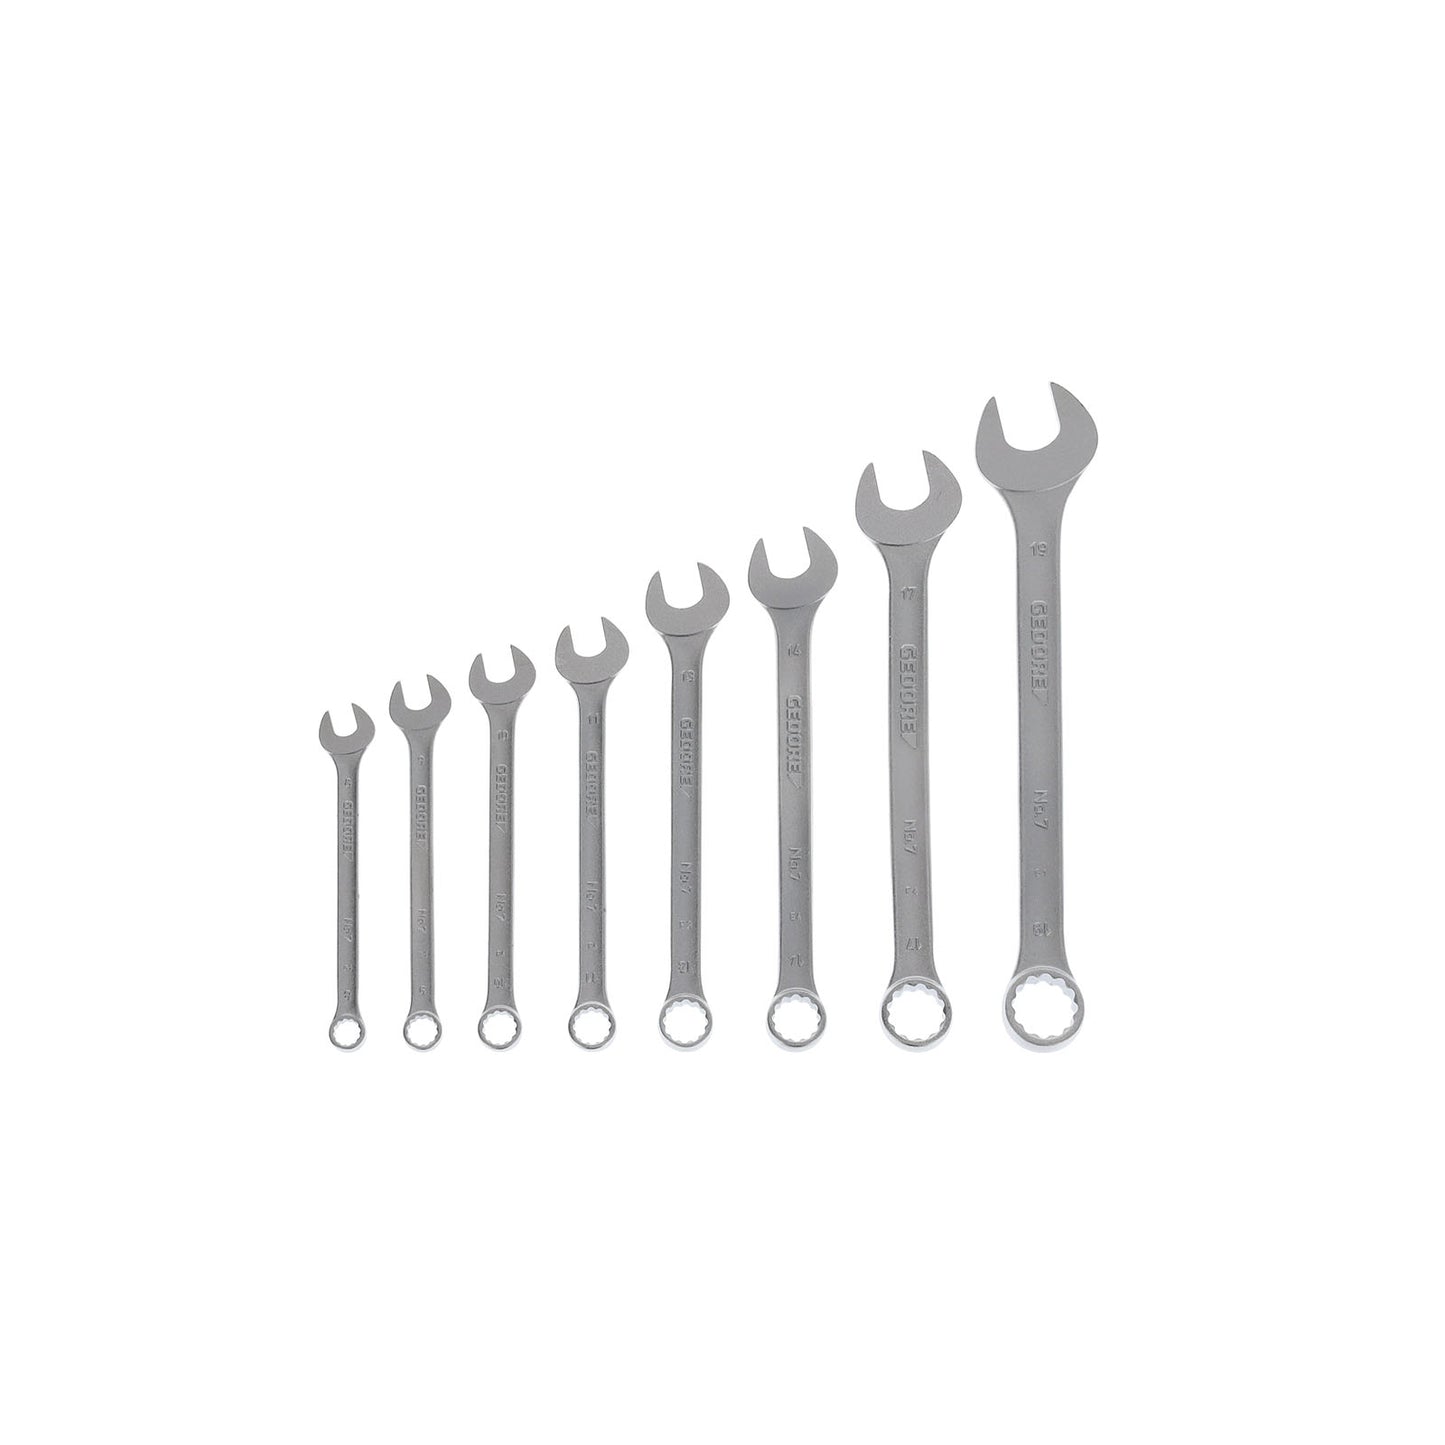 GEDORE 7-080 - Set of 8 Combination Wrenches (6092850)